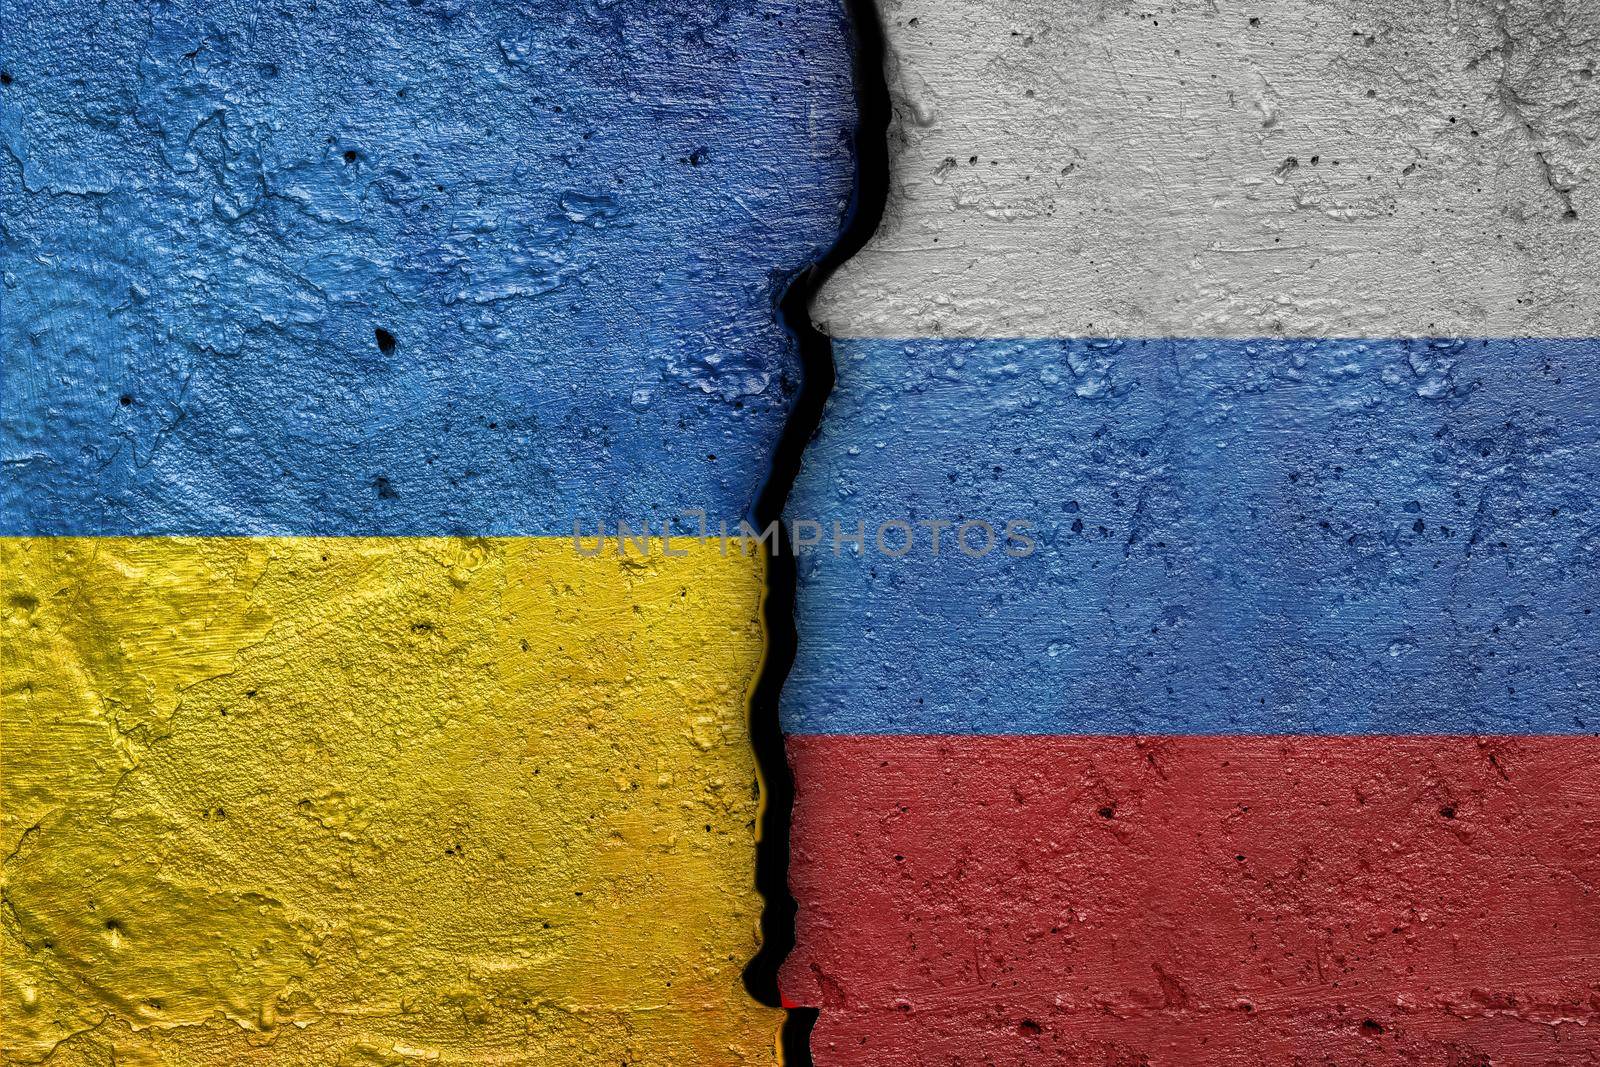 Ukraine and Russia - Cracked concrete wall painted with a Ukrainian flag on the left and a Russian flag on the right